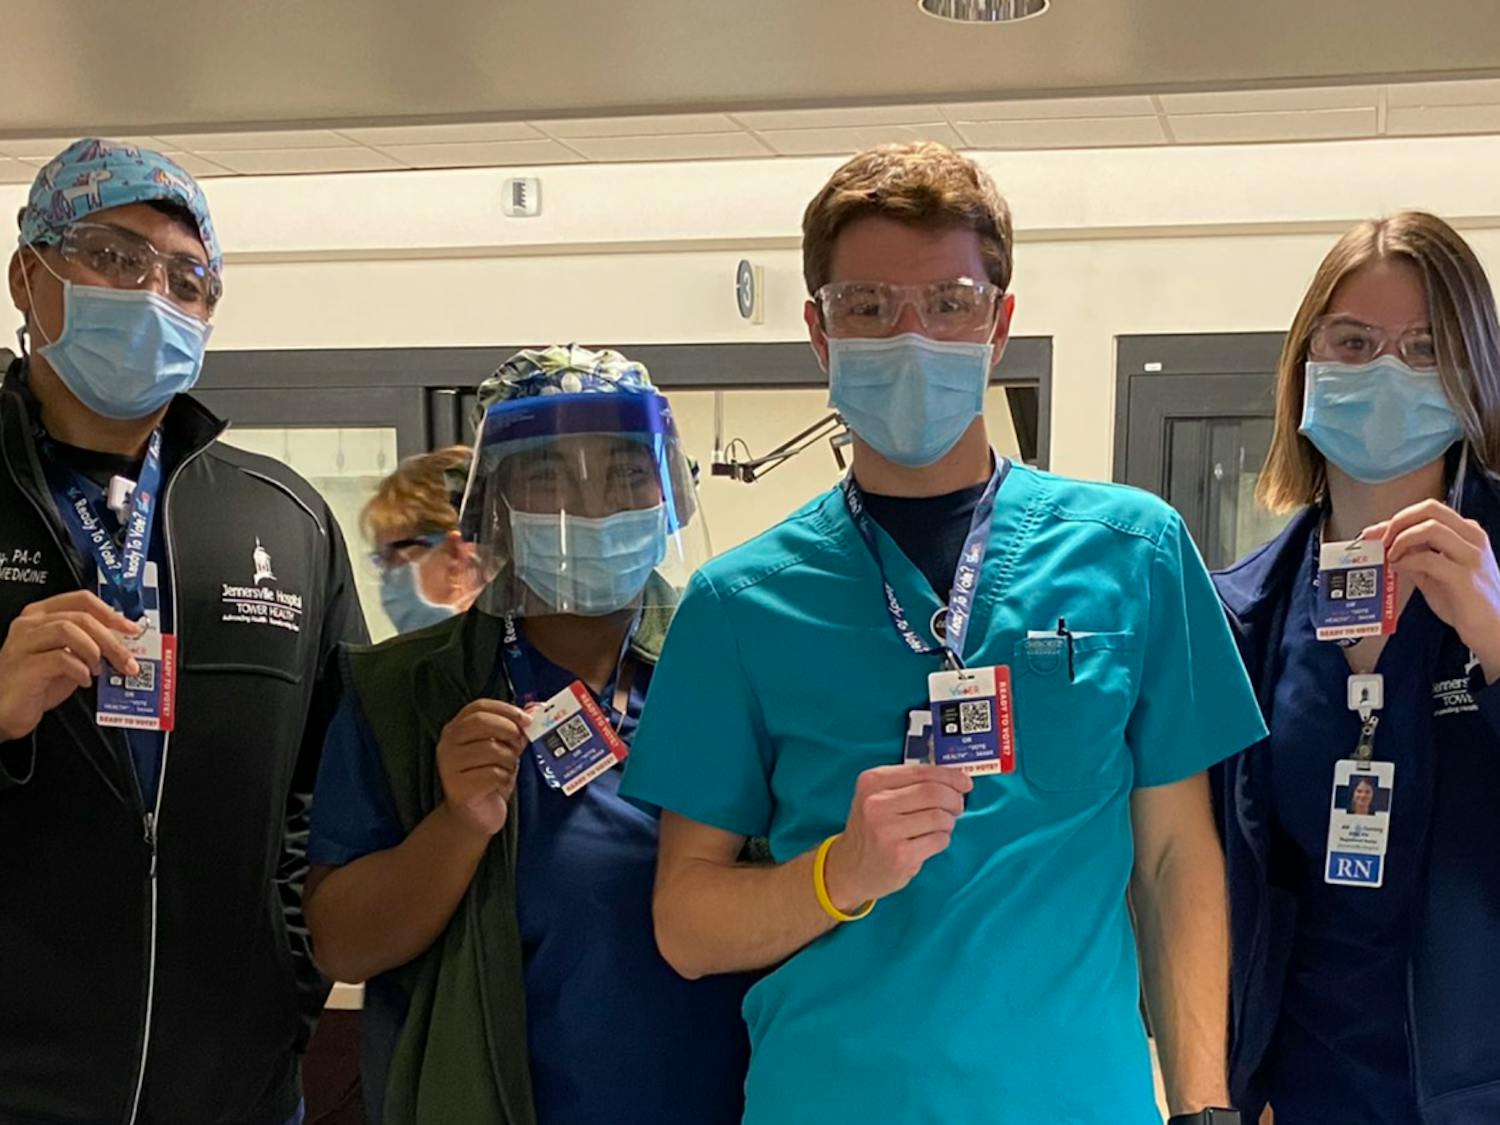 Hospital workers pose with their kits and badges. Photo courtesy of Noam Brenner.